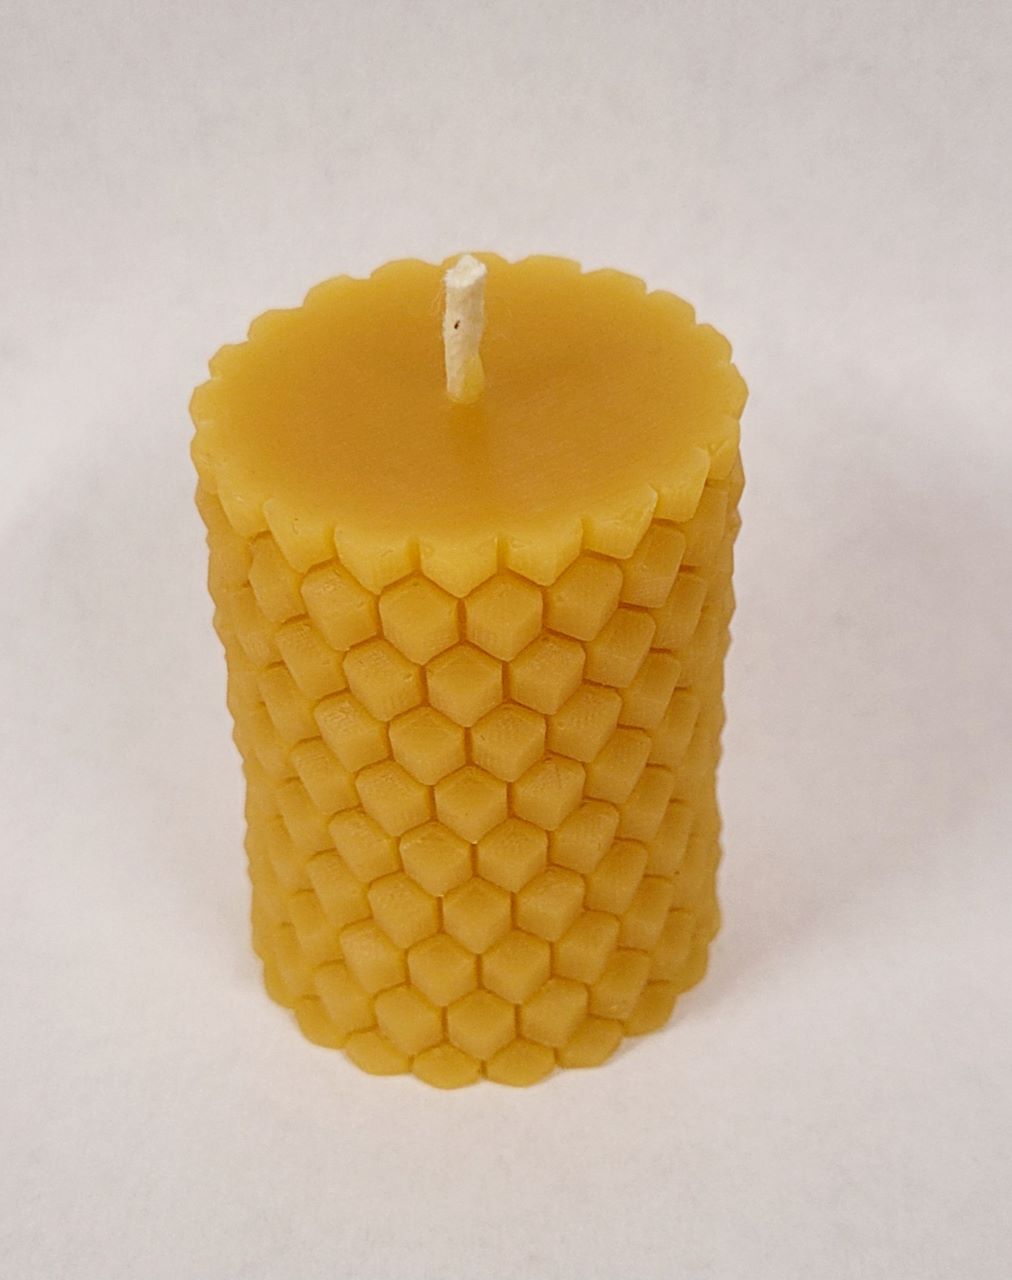 Solid Beeswax 'Knurl'/Votive Small Pillar Candle x 2